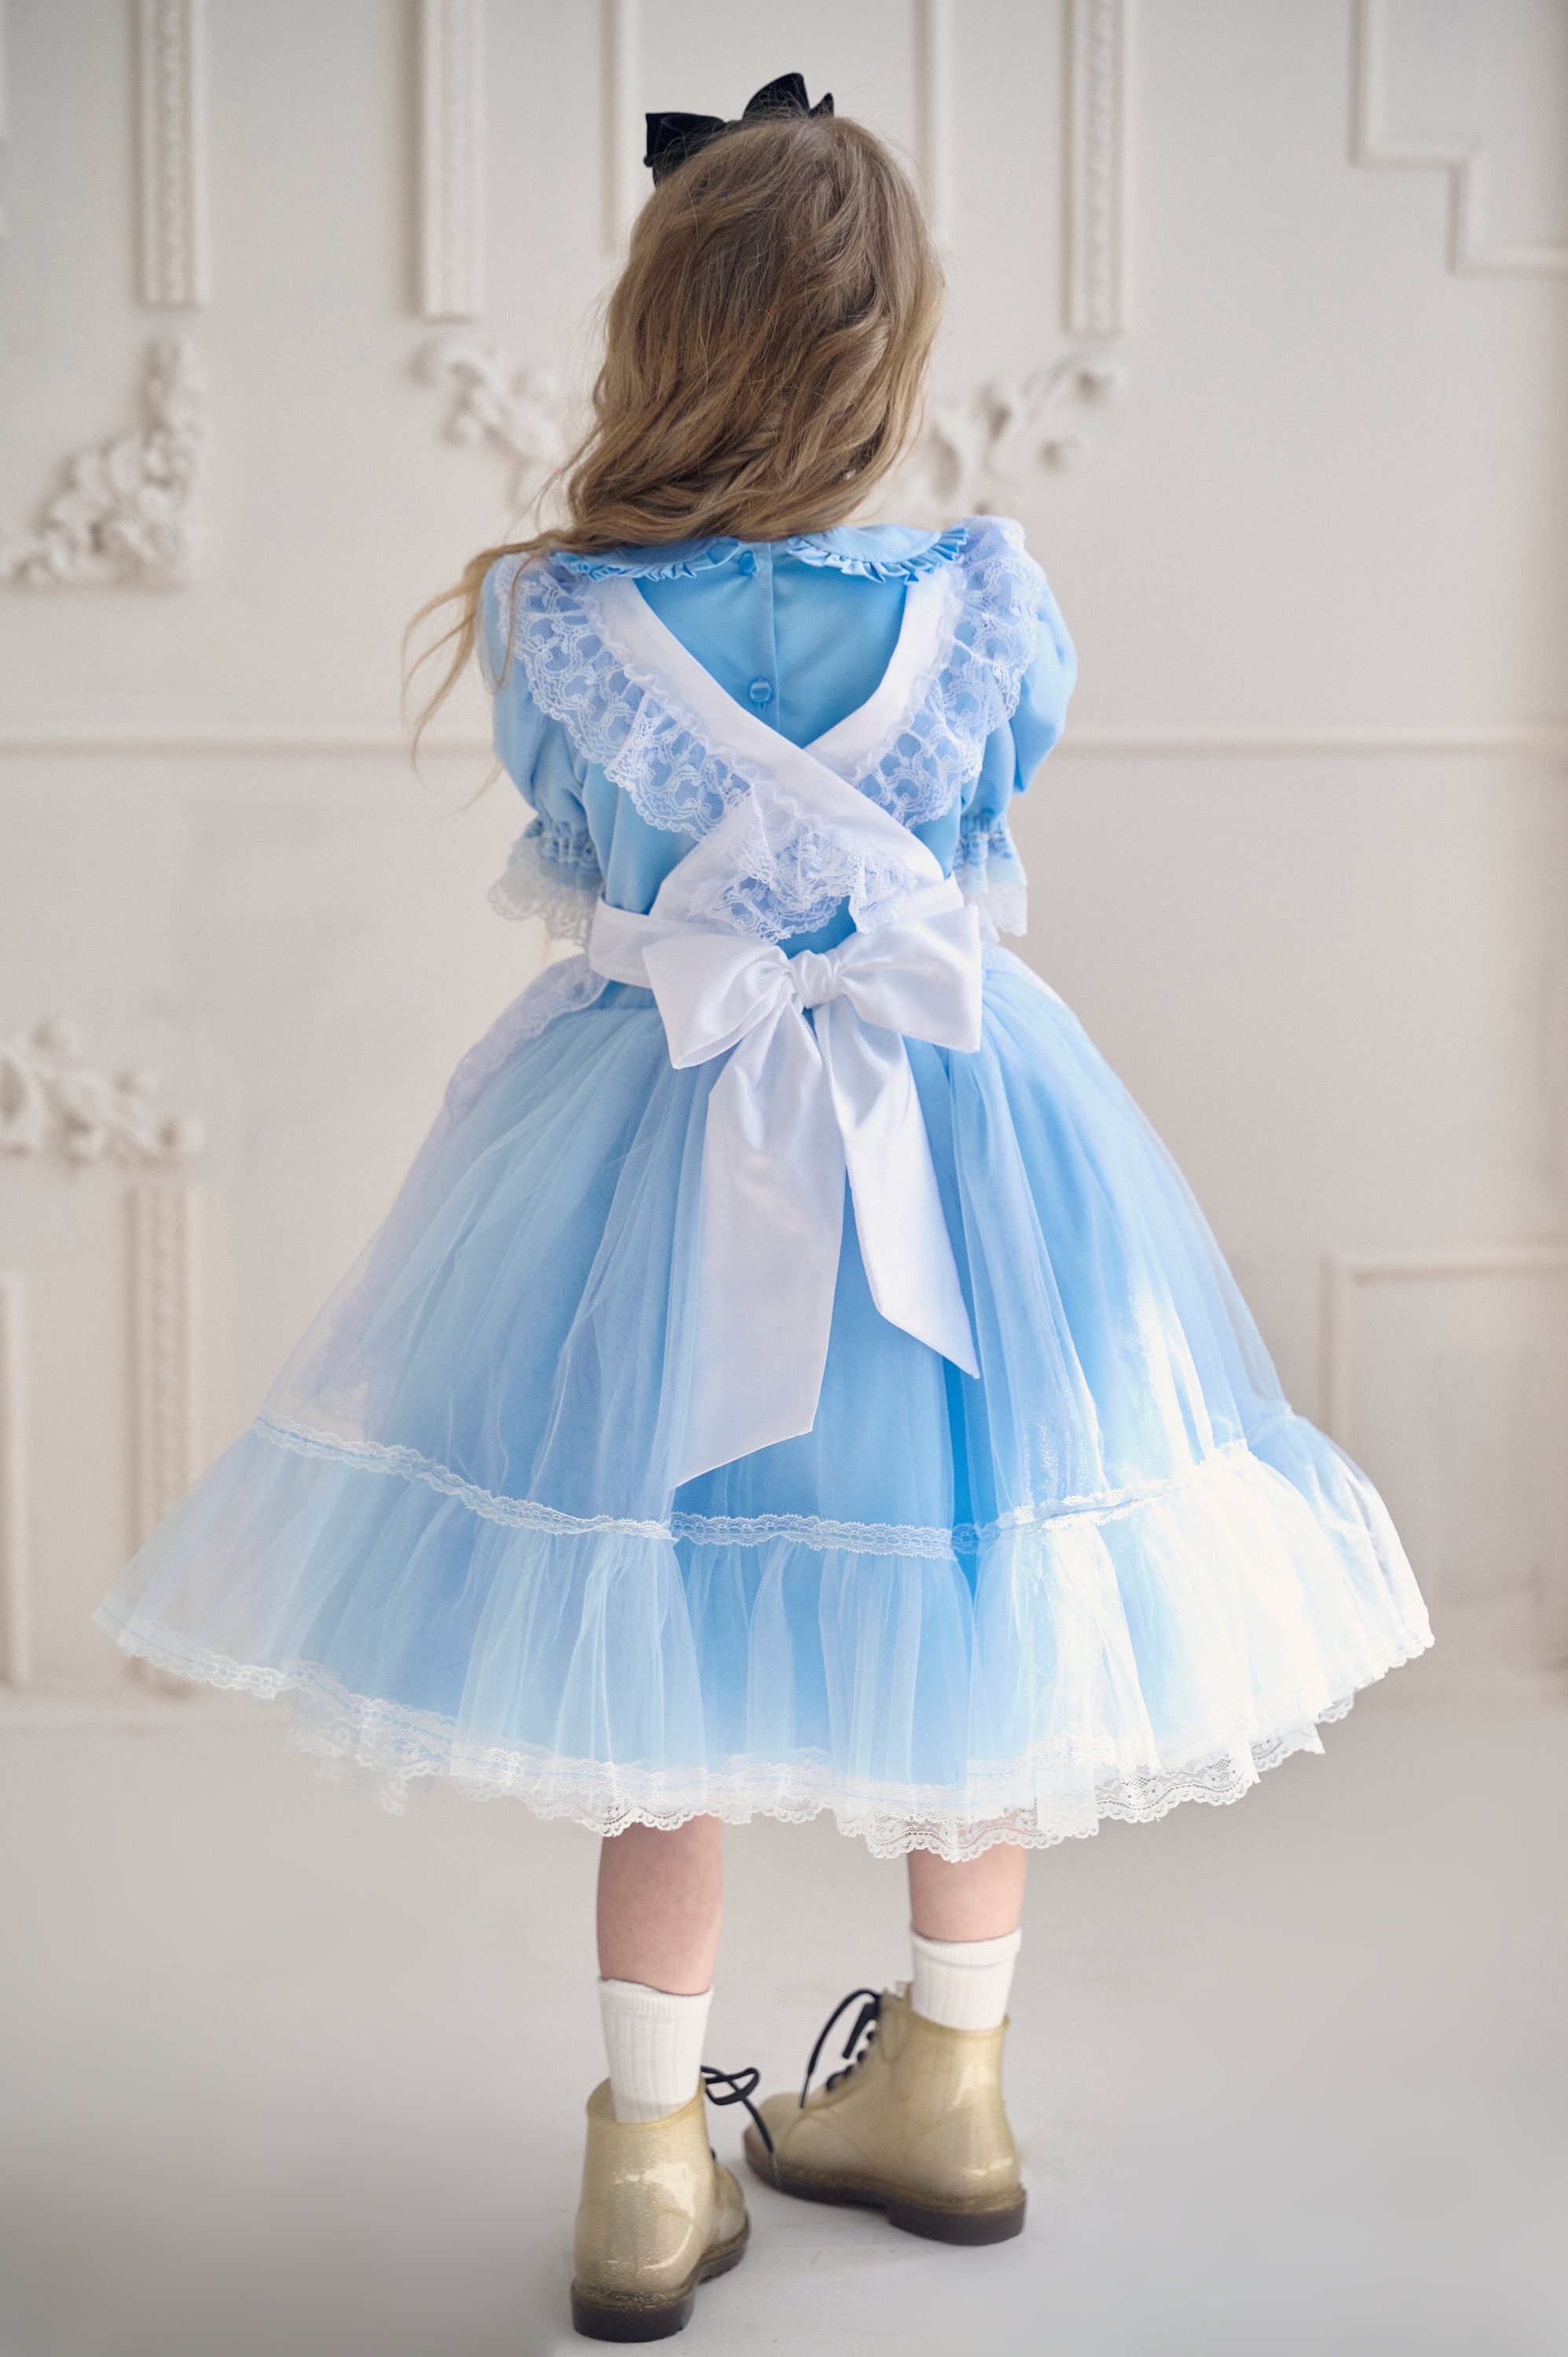 Alice Baby Dress, Blue Girl Dress, Wonderland Toddler Dress, Cosplay Costume, Dress with Apron, Easter, Eid, Birthday Party Dress